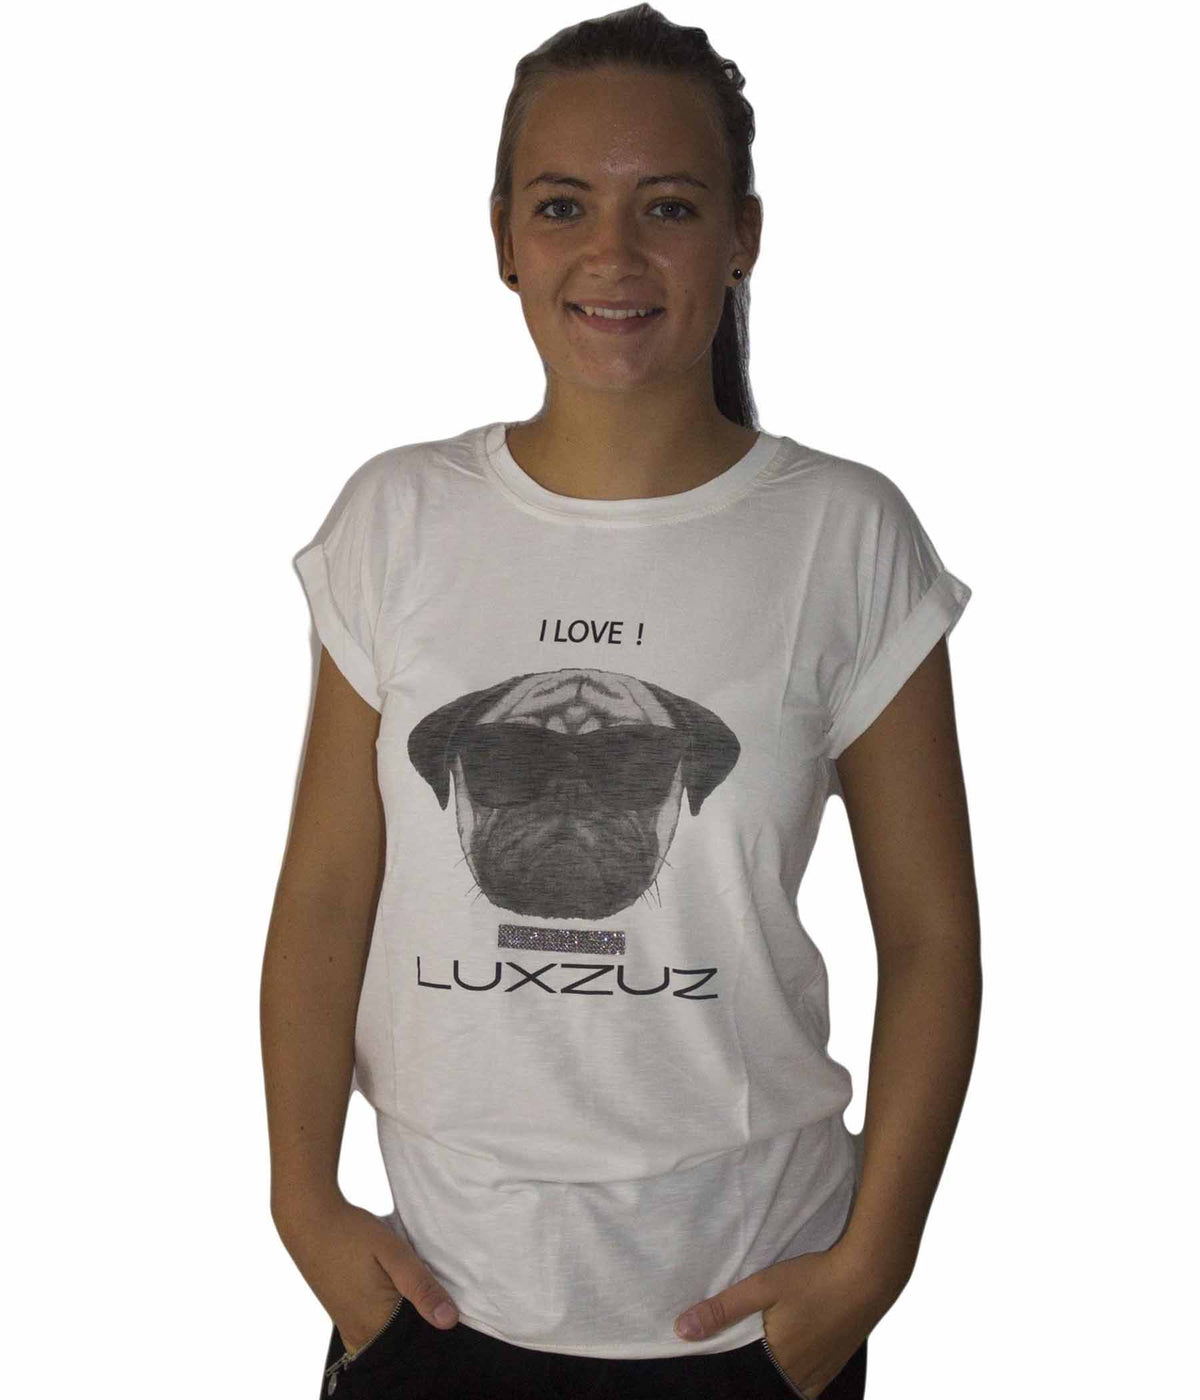 ONE-TWO LUXZUZ T-SHIRT